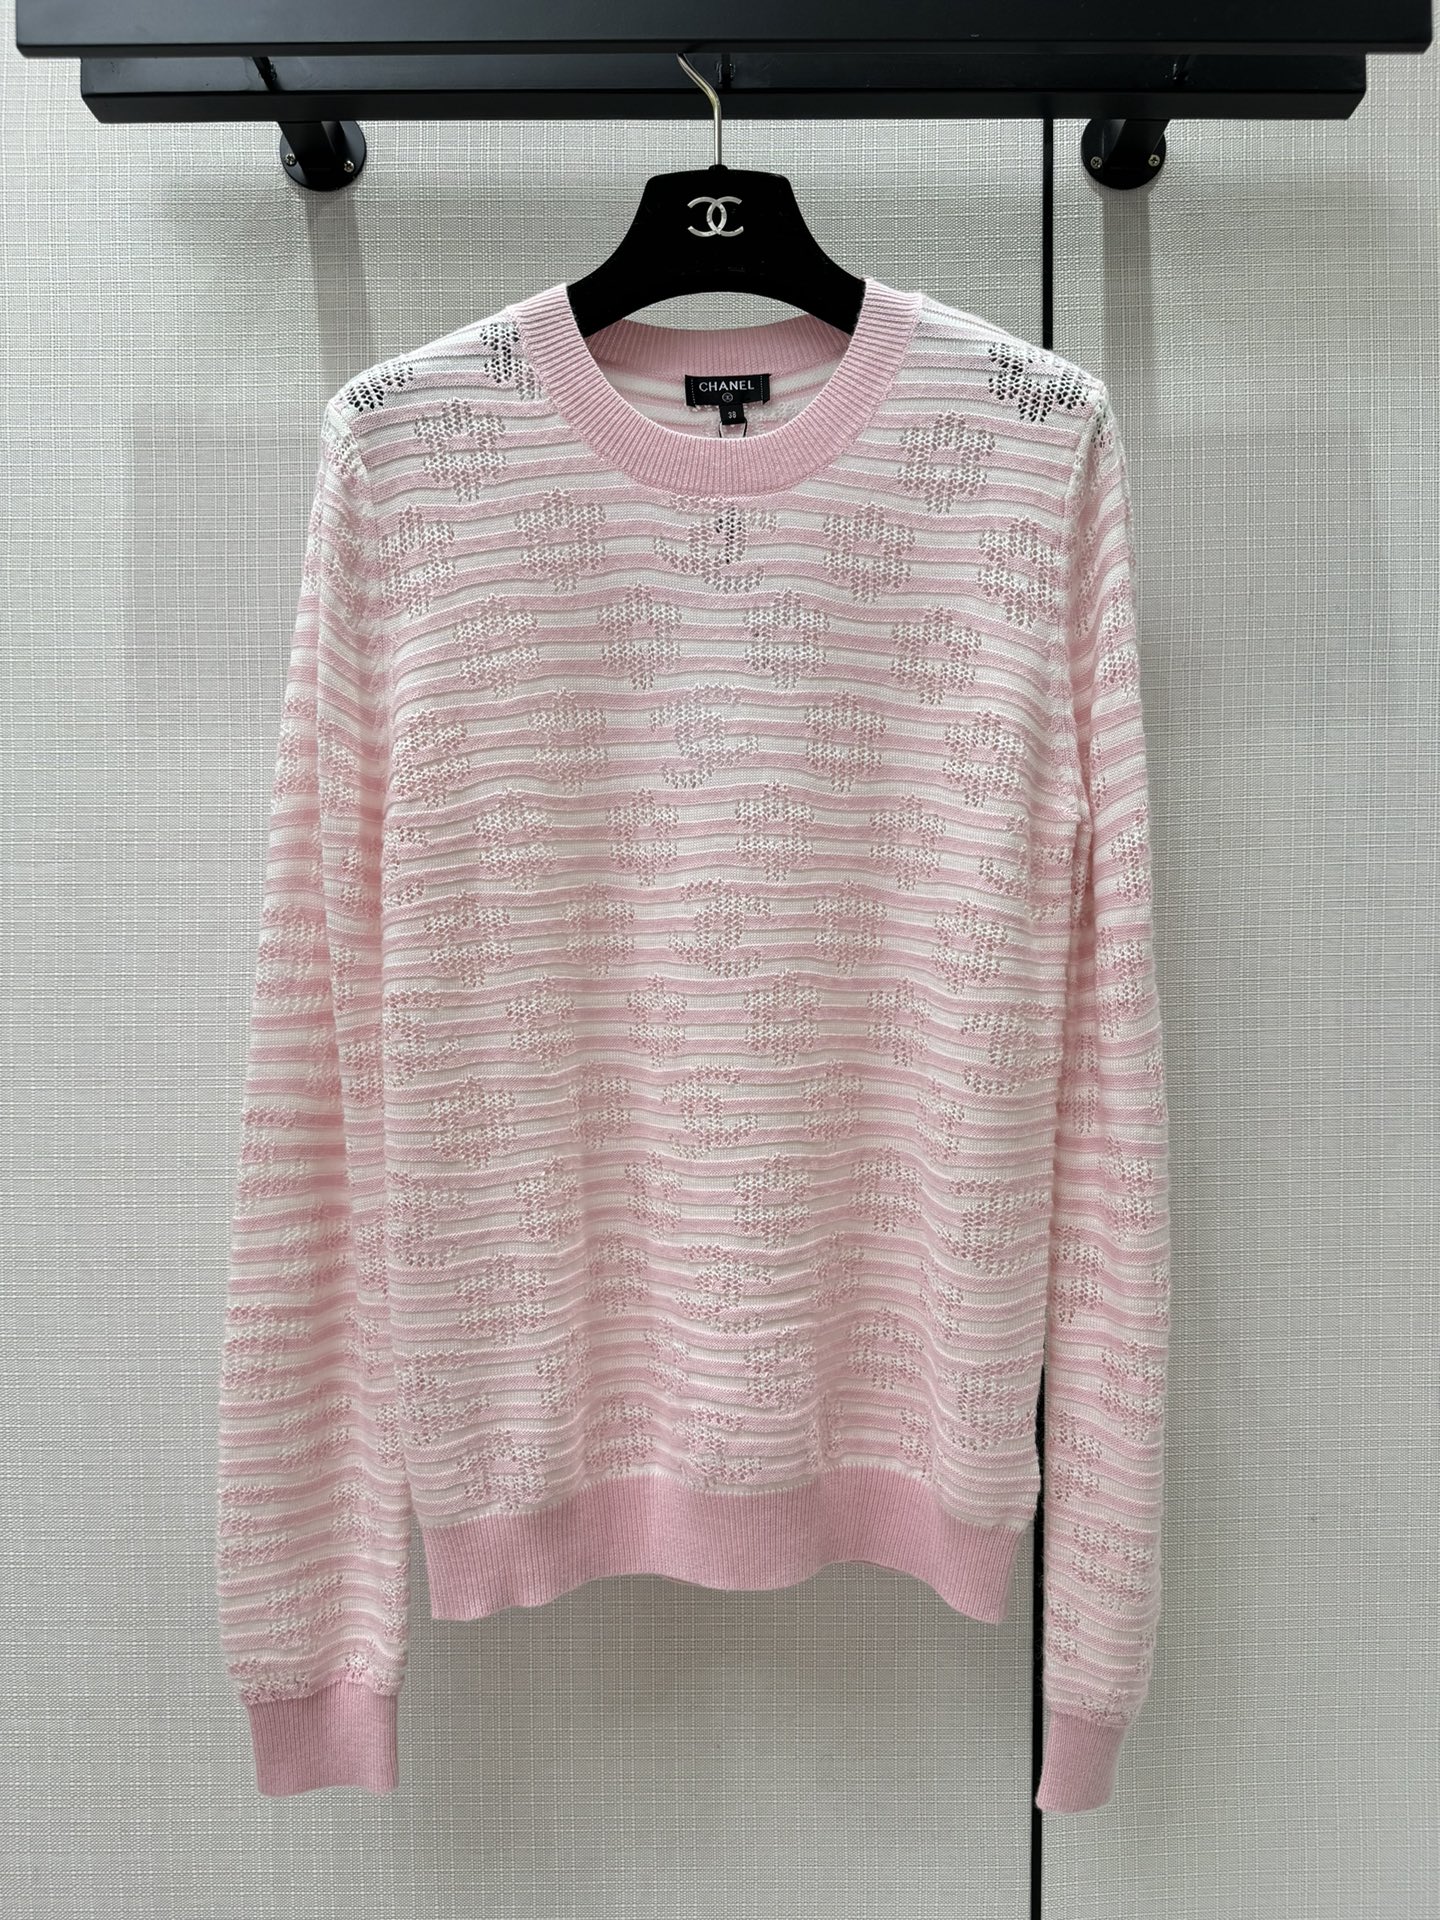 Chanel Clothing Knit Sweater Pink Openwork Knitting Spring Collection